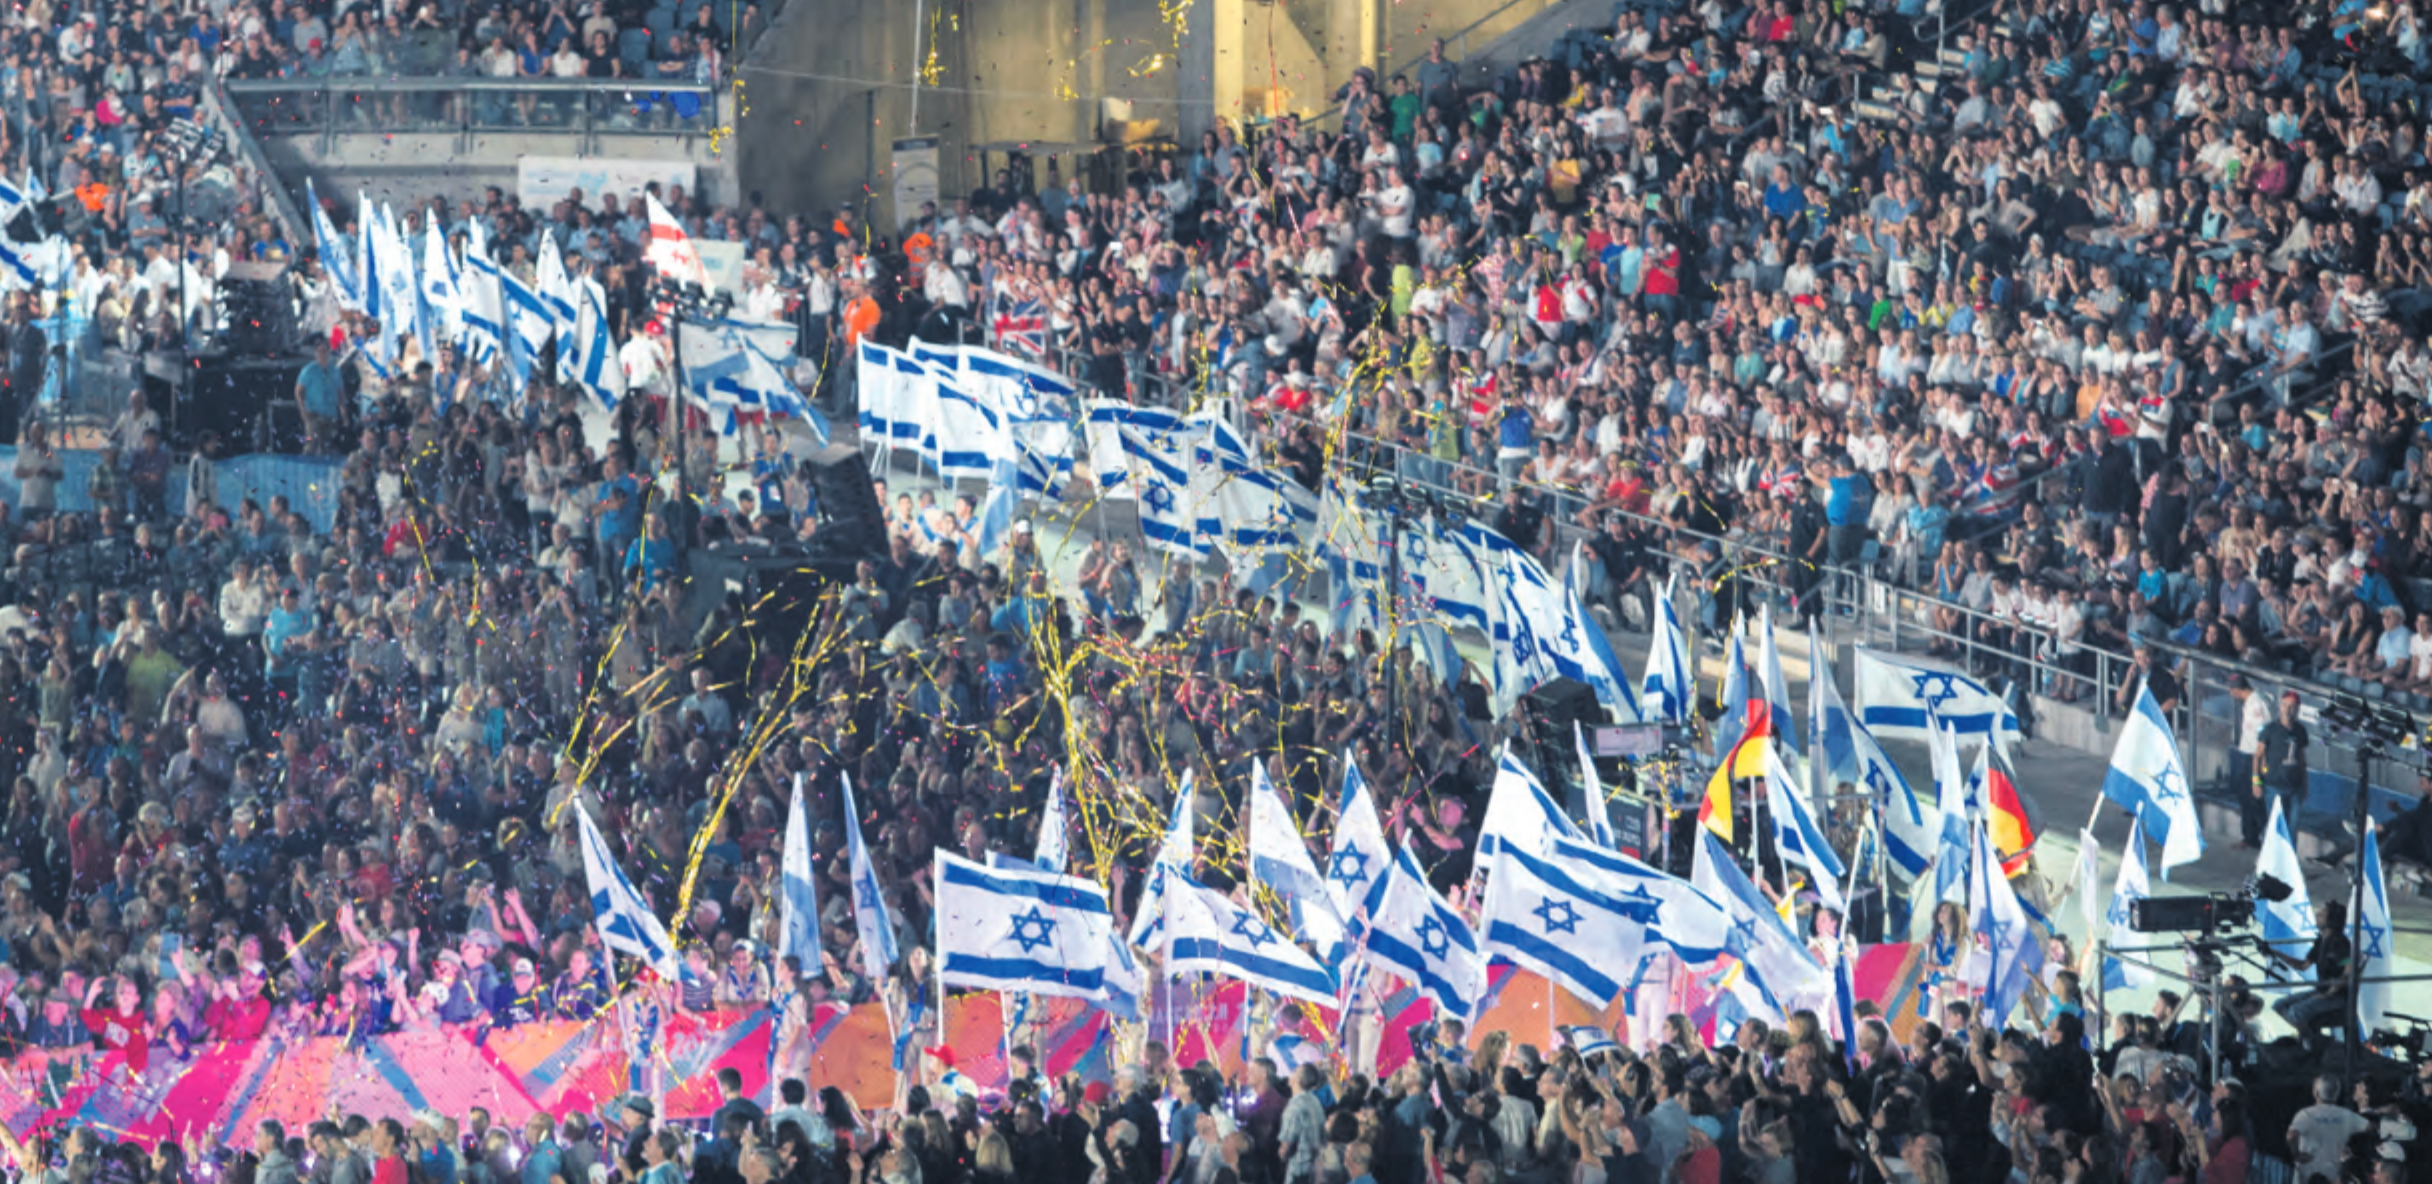 Israeli flags flying high at the 2017 Maccabiah Games opening ceremony at Teddy Stadium in Jerusalem. Photo: Julie Kerbel.